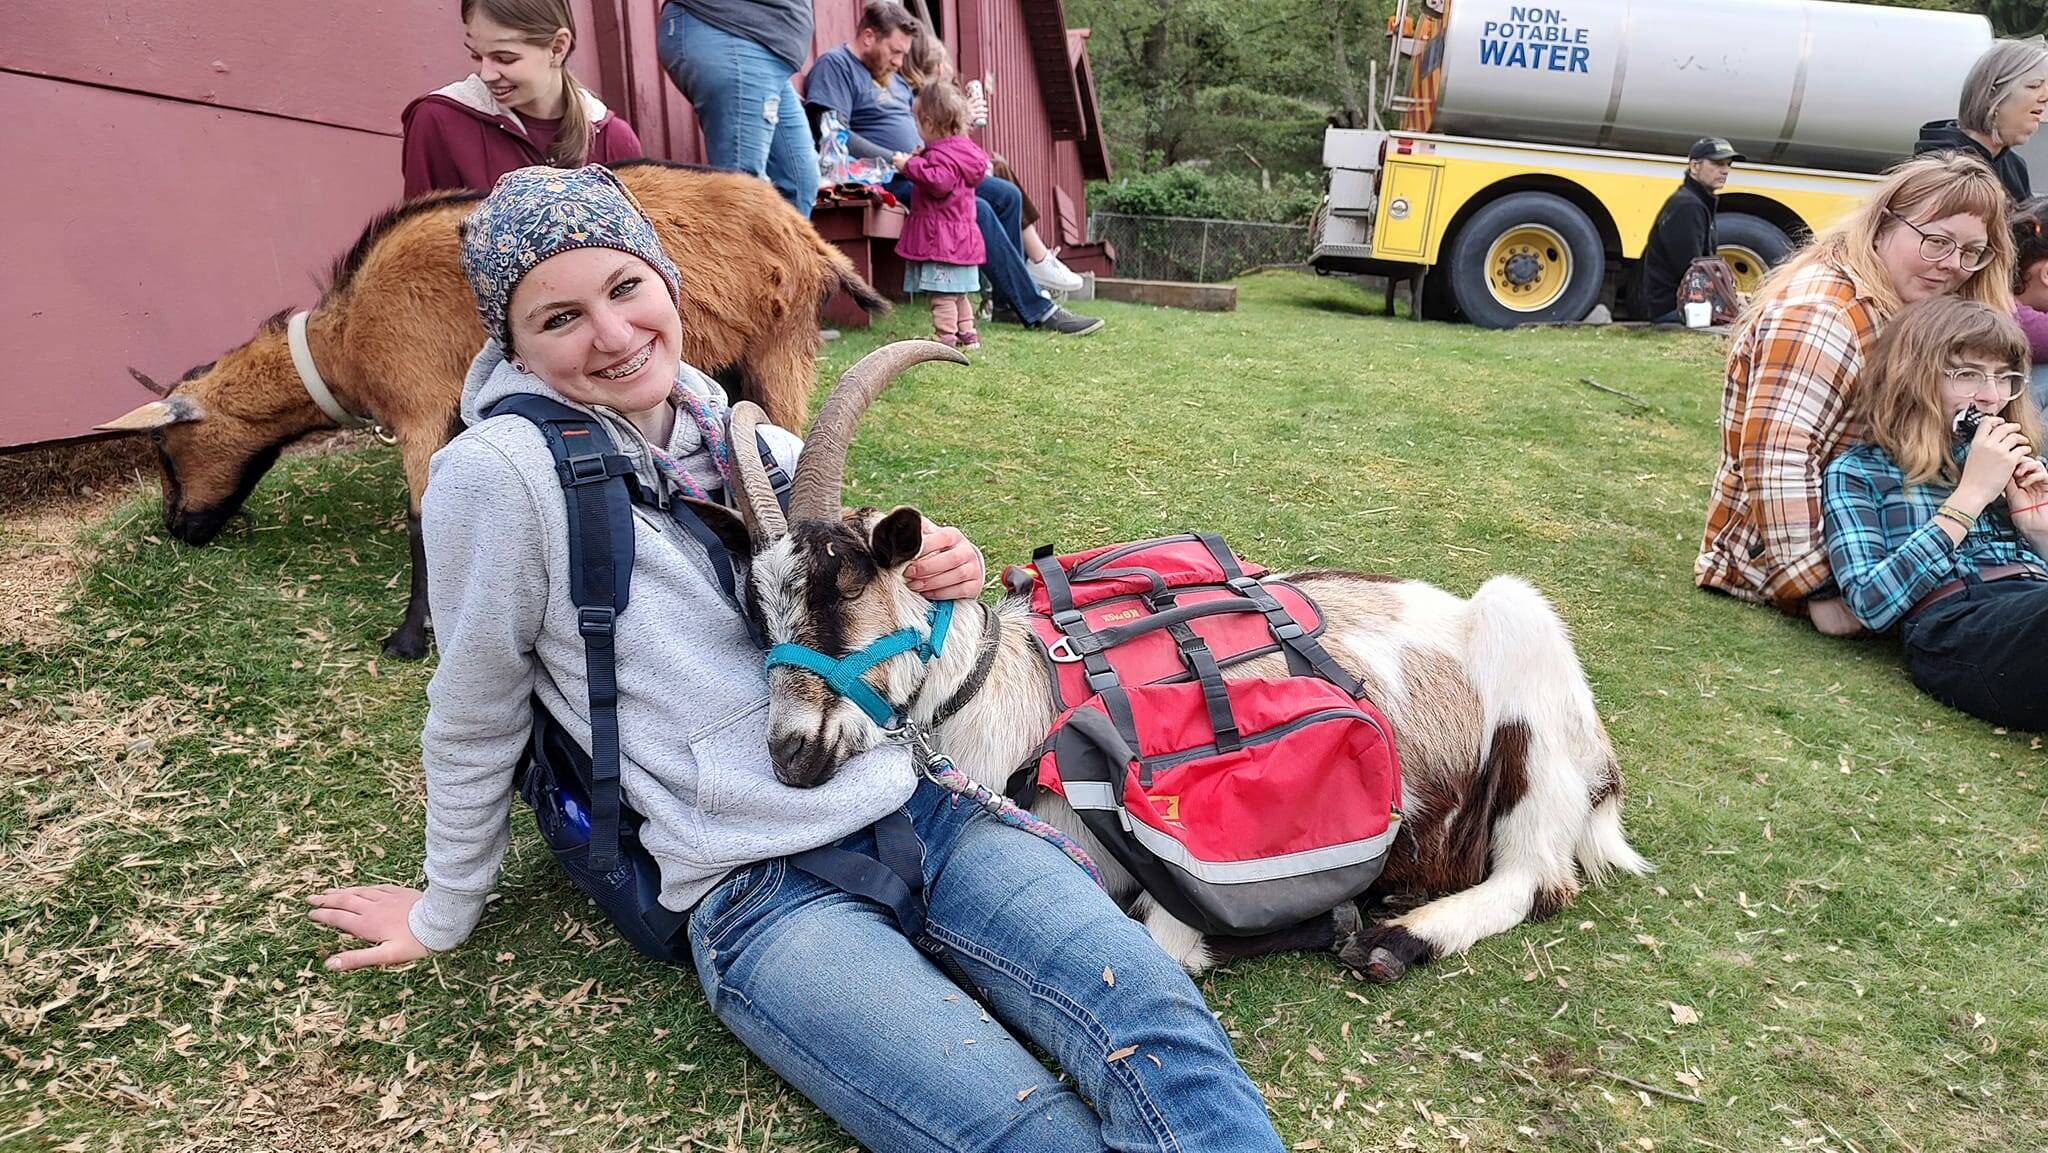 Photo provided
Whidbey Homesteaders 4-H club member Lia Stamatiou, 16, with Norman the goat.